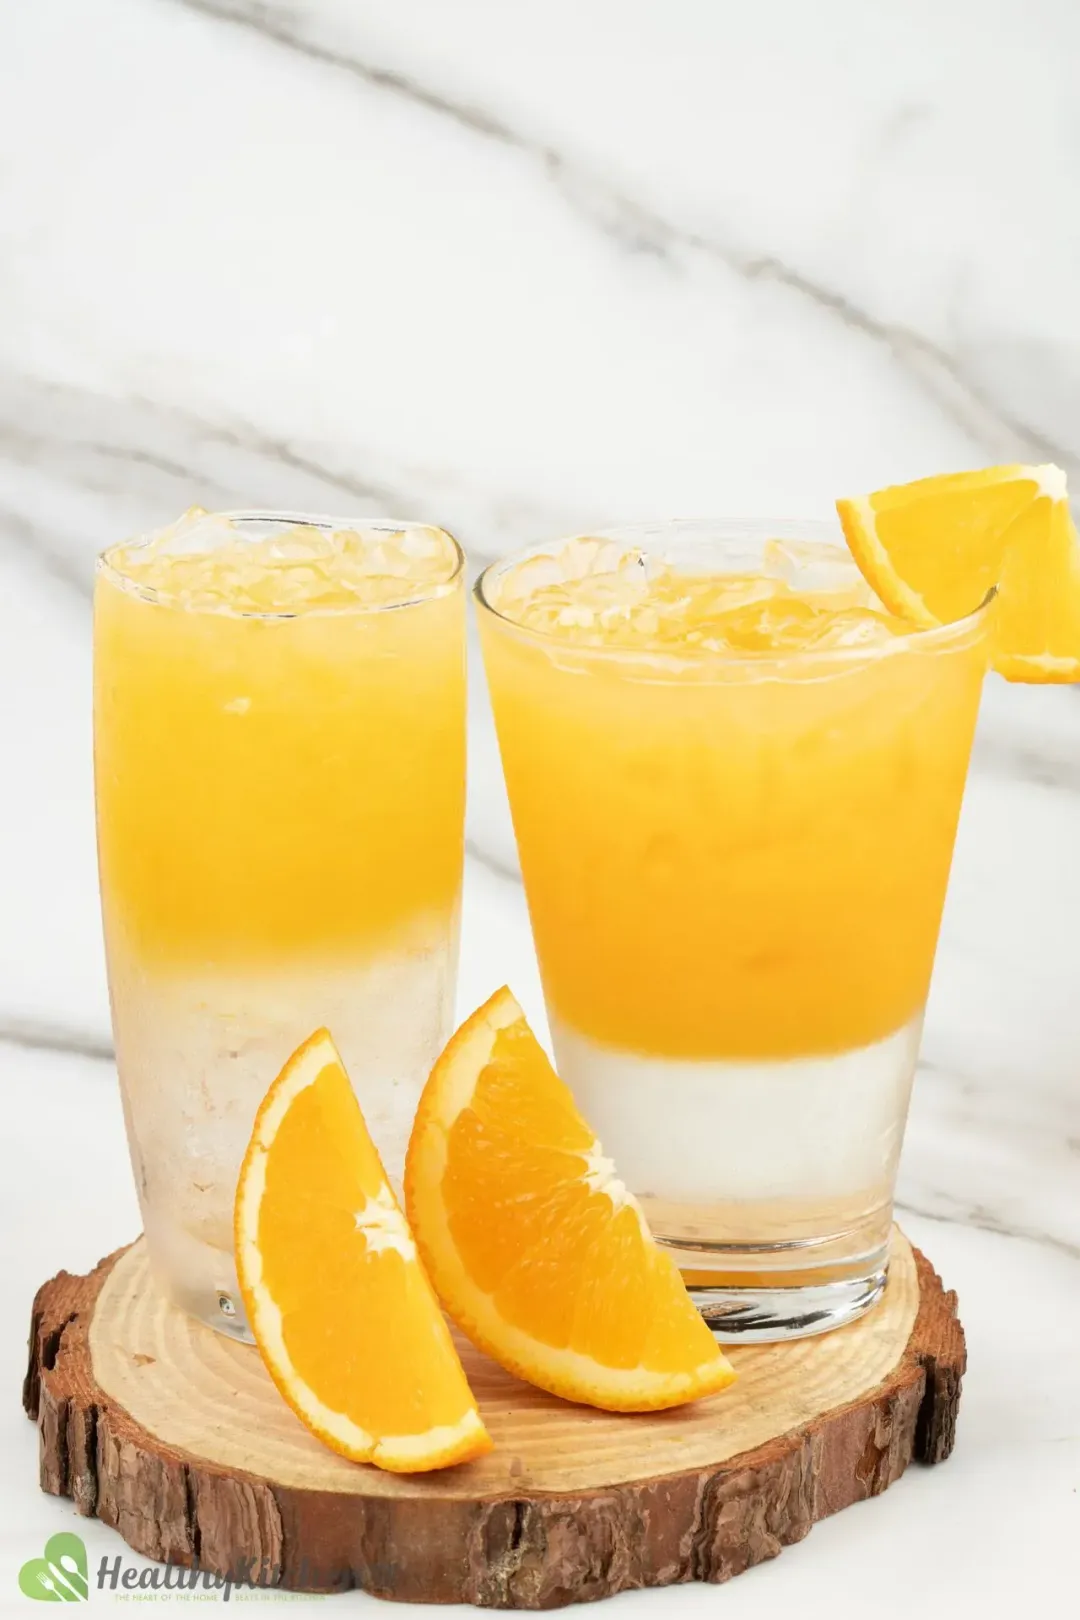 Two glasses of orange juice and vodka separated in two layers, garnished with orange wedges